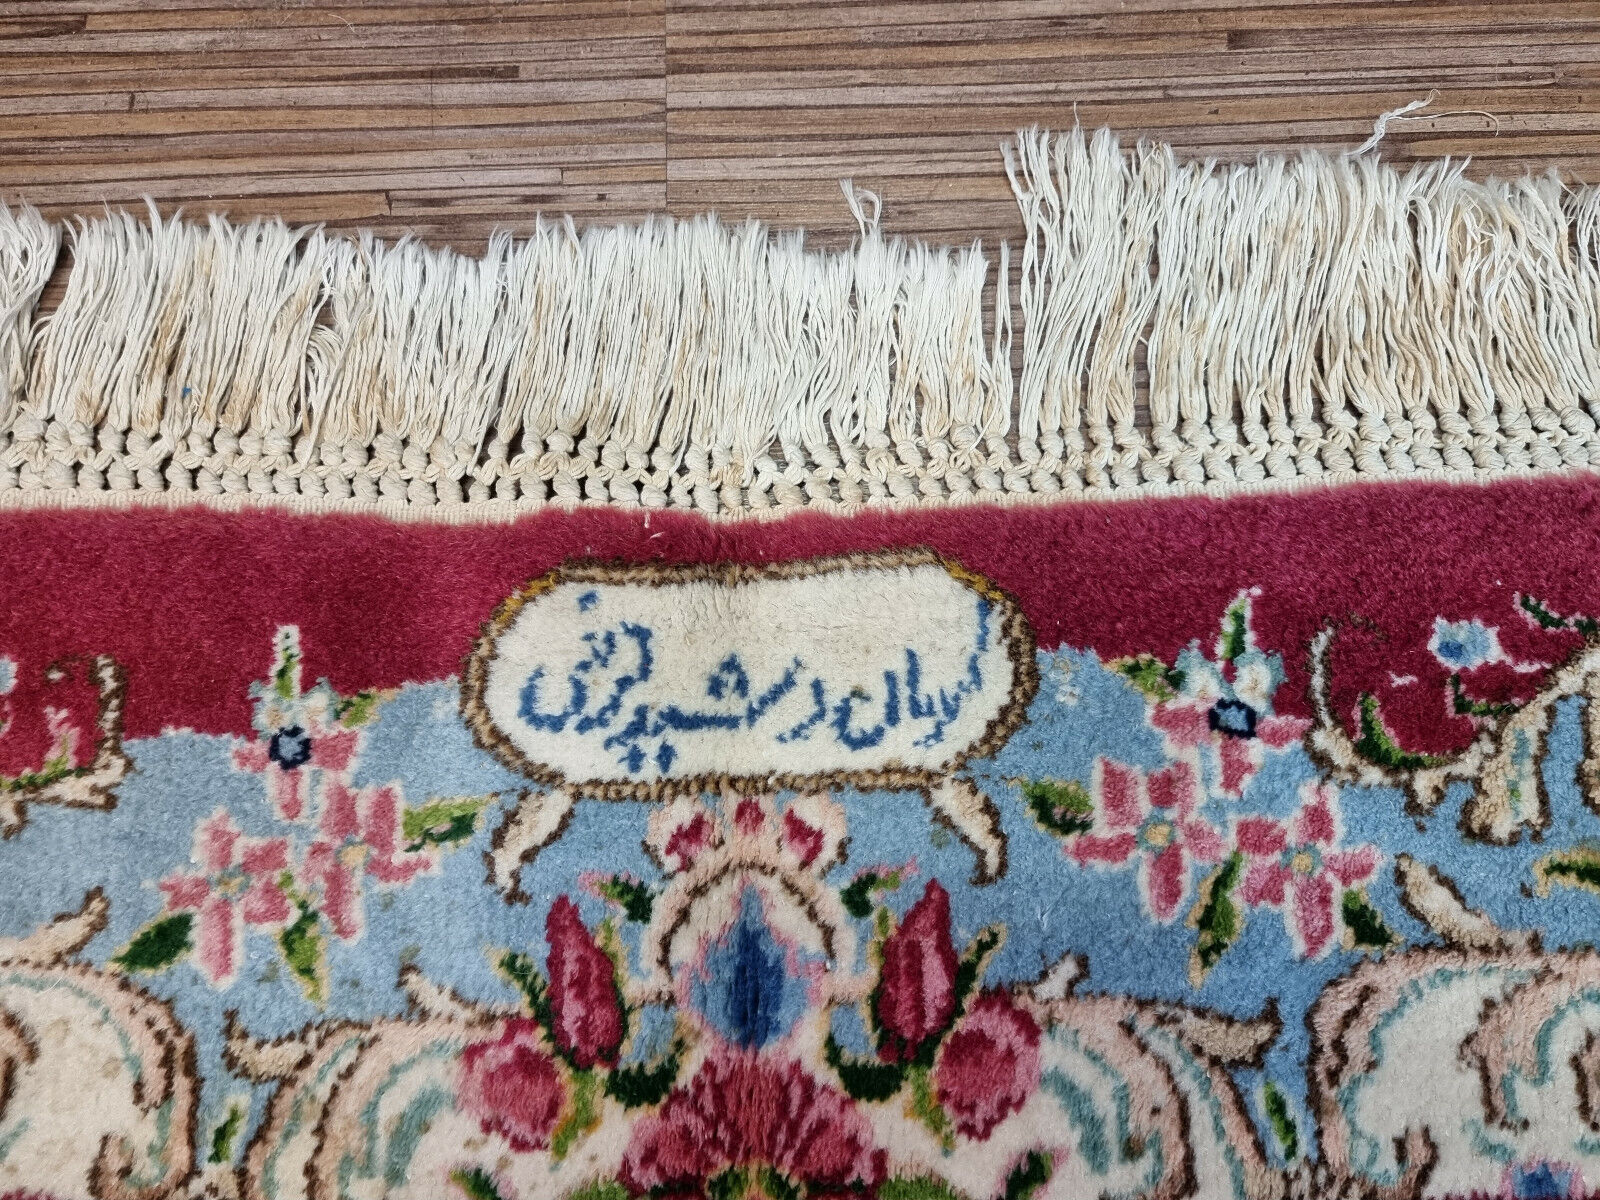 Close-up of blues, whites, and yellows against dark background on Handmade Vintage Persian Kerman Rug - Detailed view showcasing the color contrast of the border against the dark background.